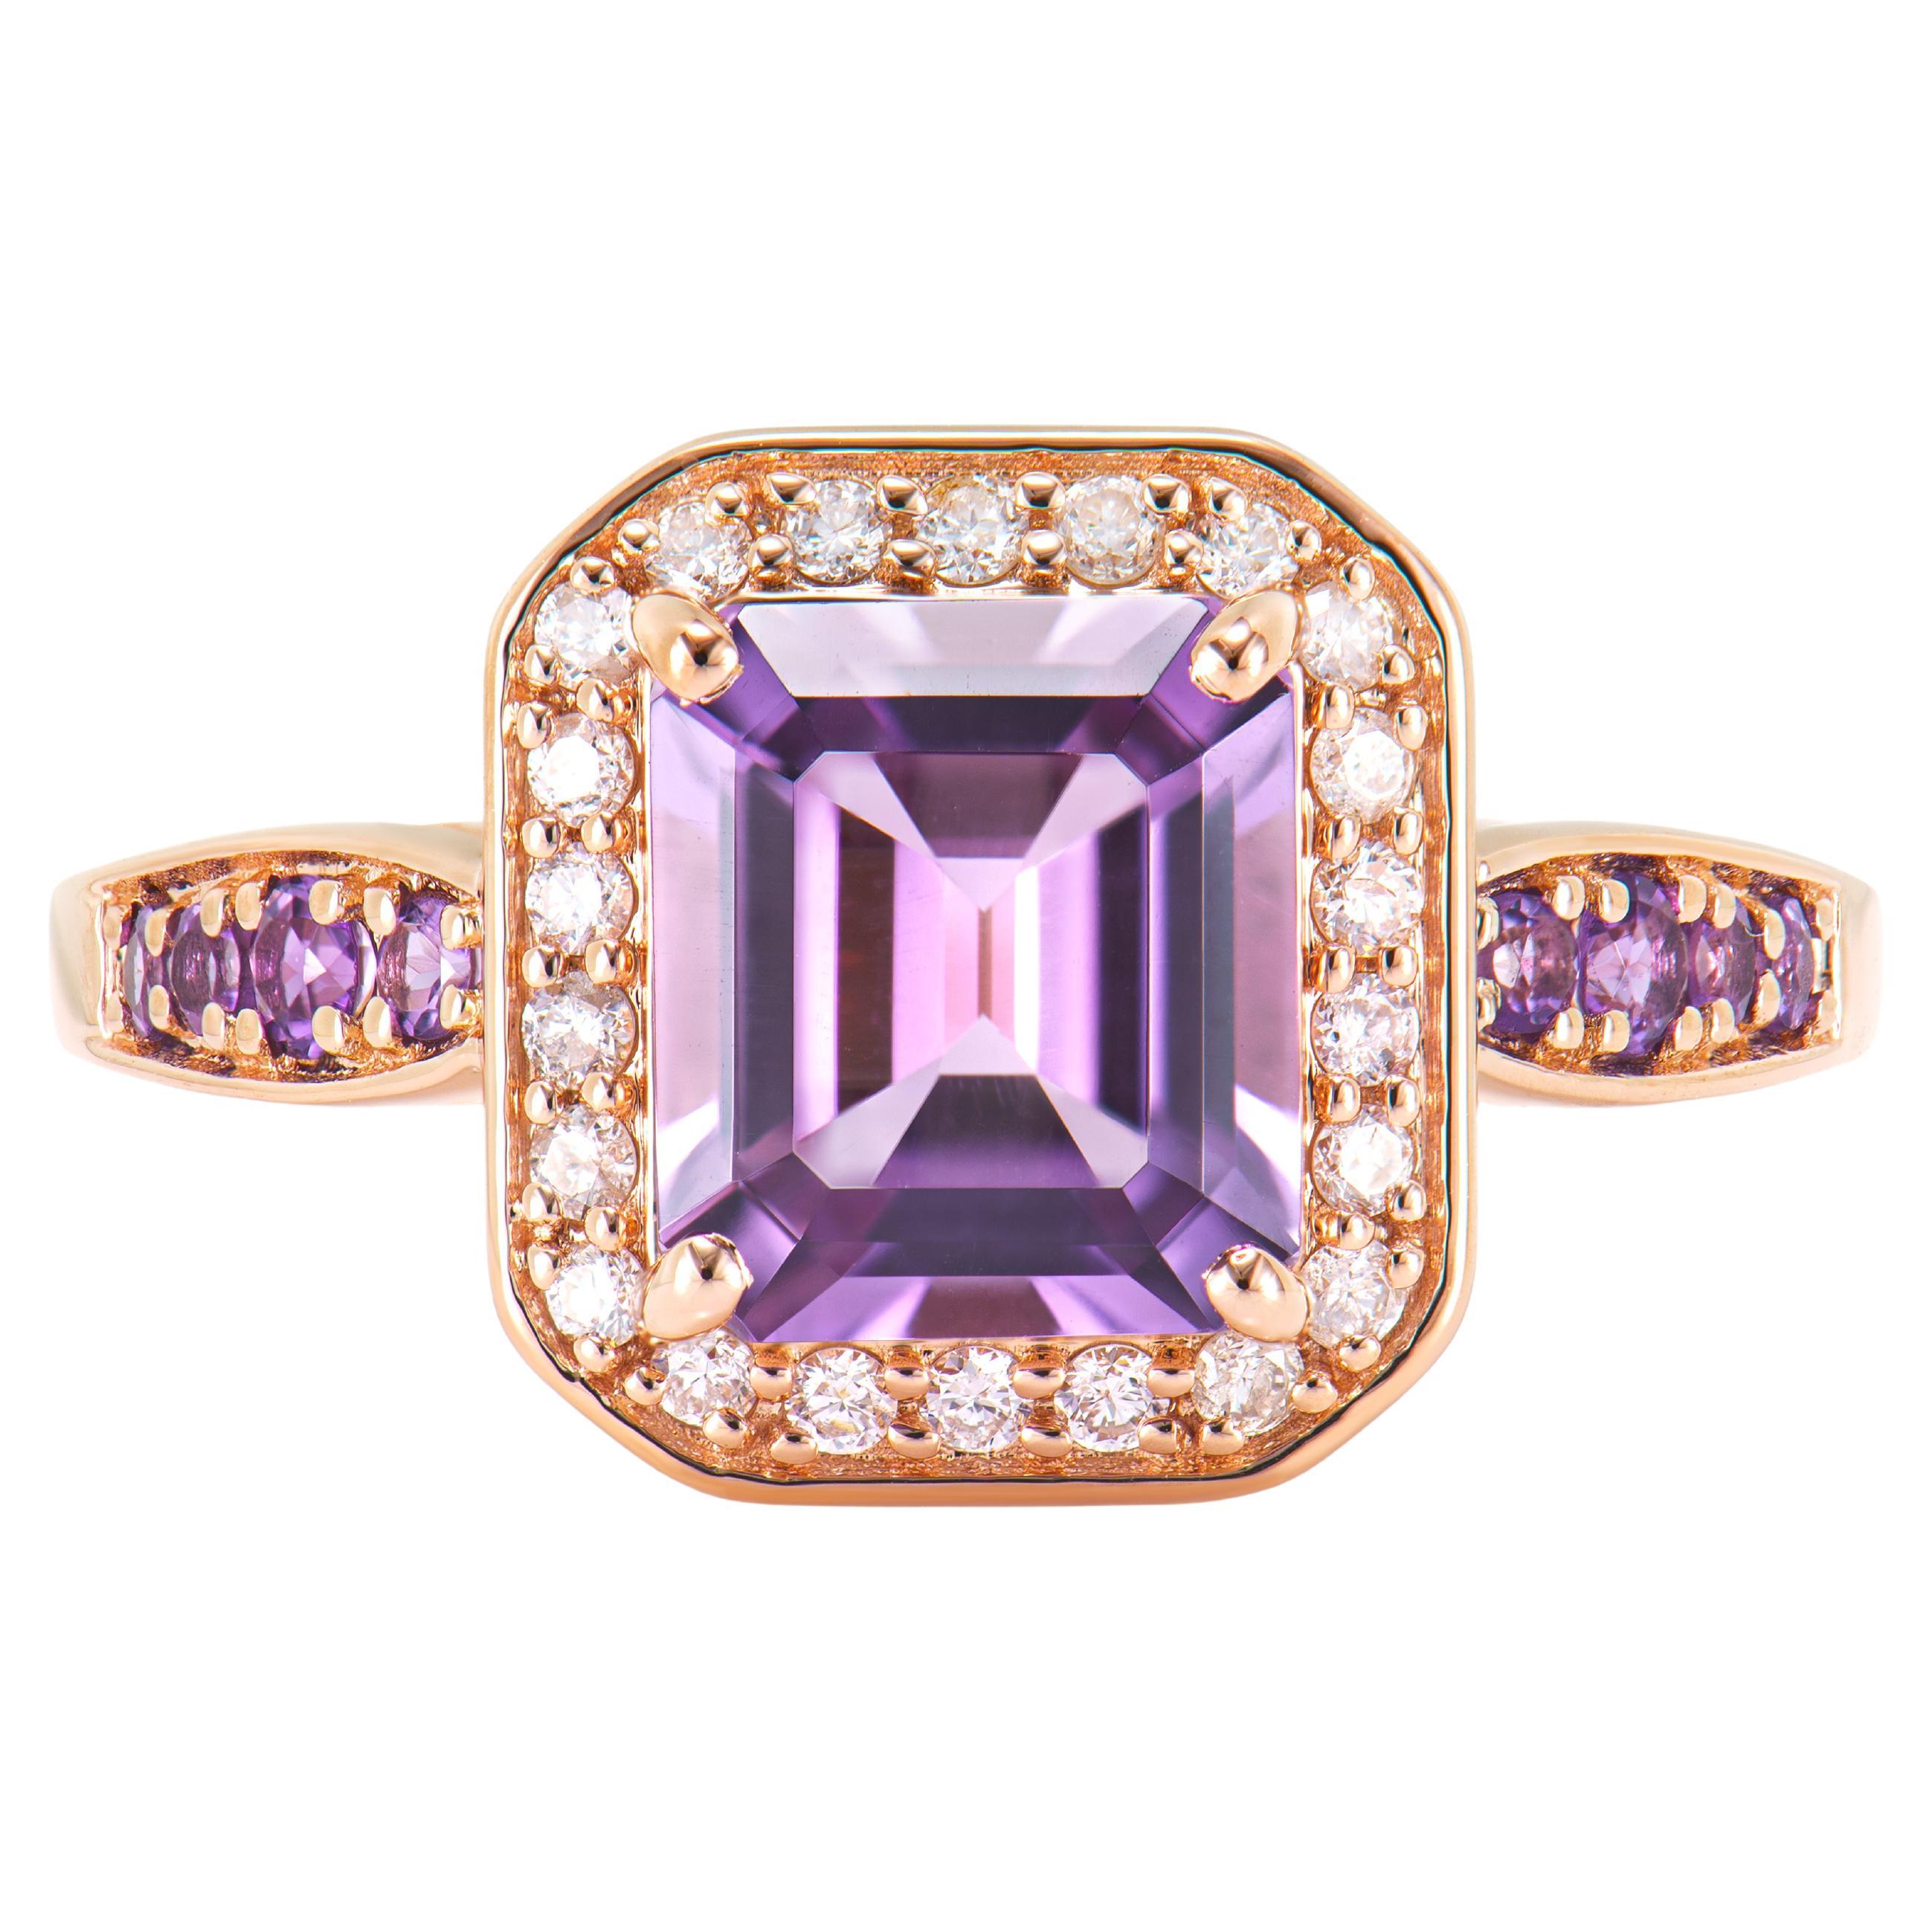 1.74 Carat Amethyst Fancy Ring in 14Karat Rose Gold with White Diamond.   For Sale